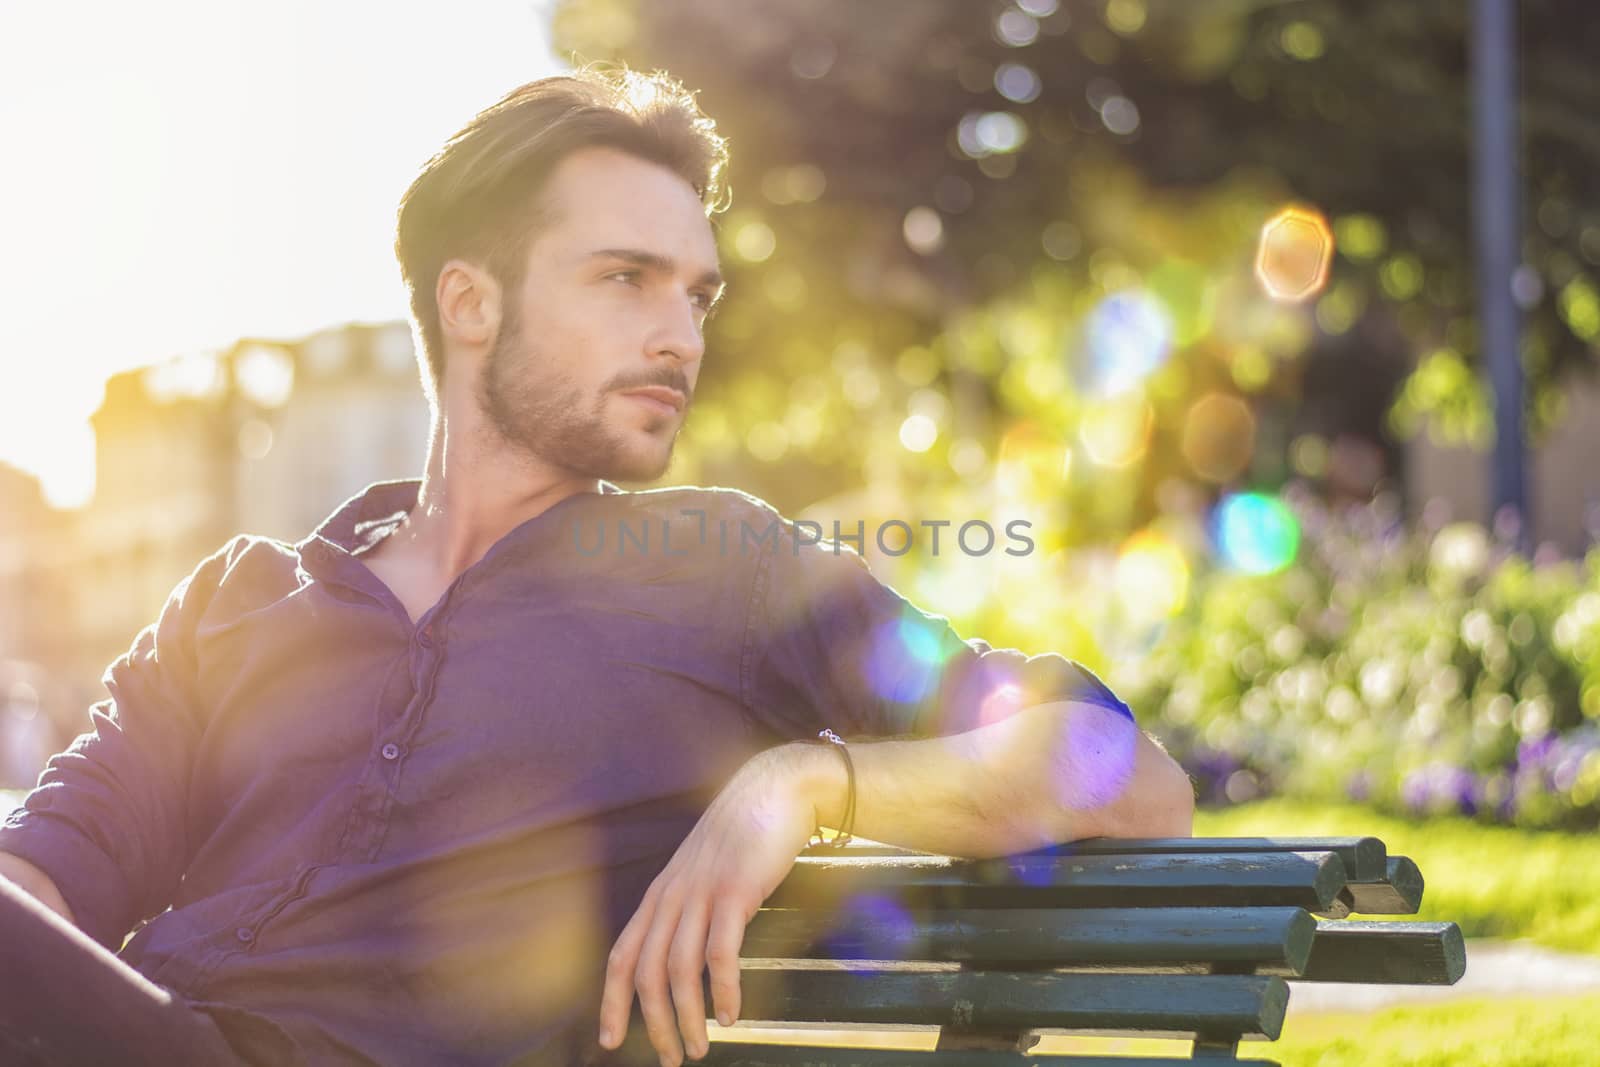 One handsome young man in city park by artofphoto